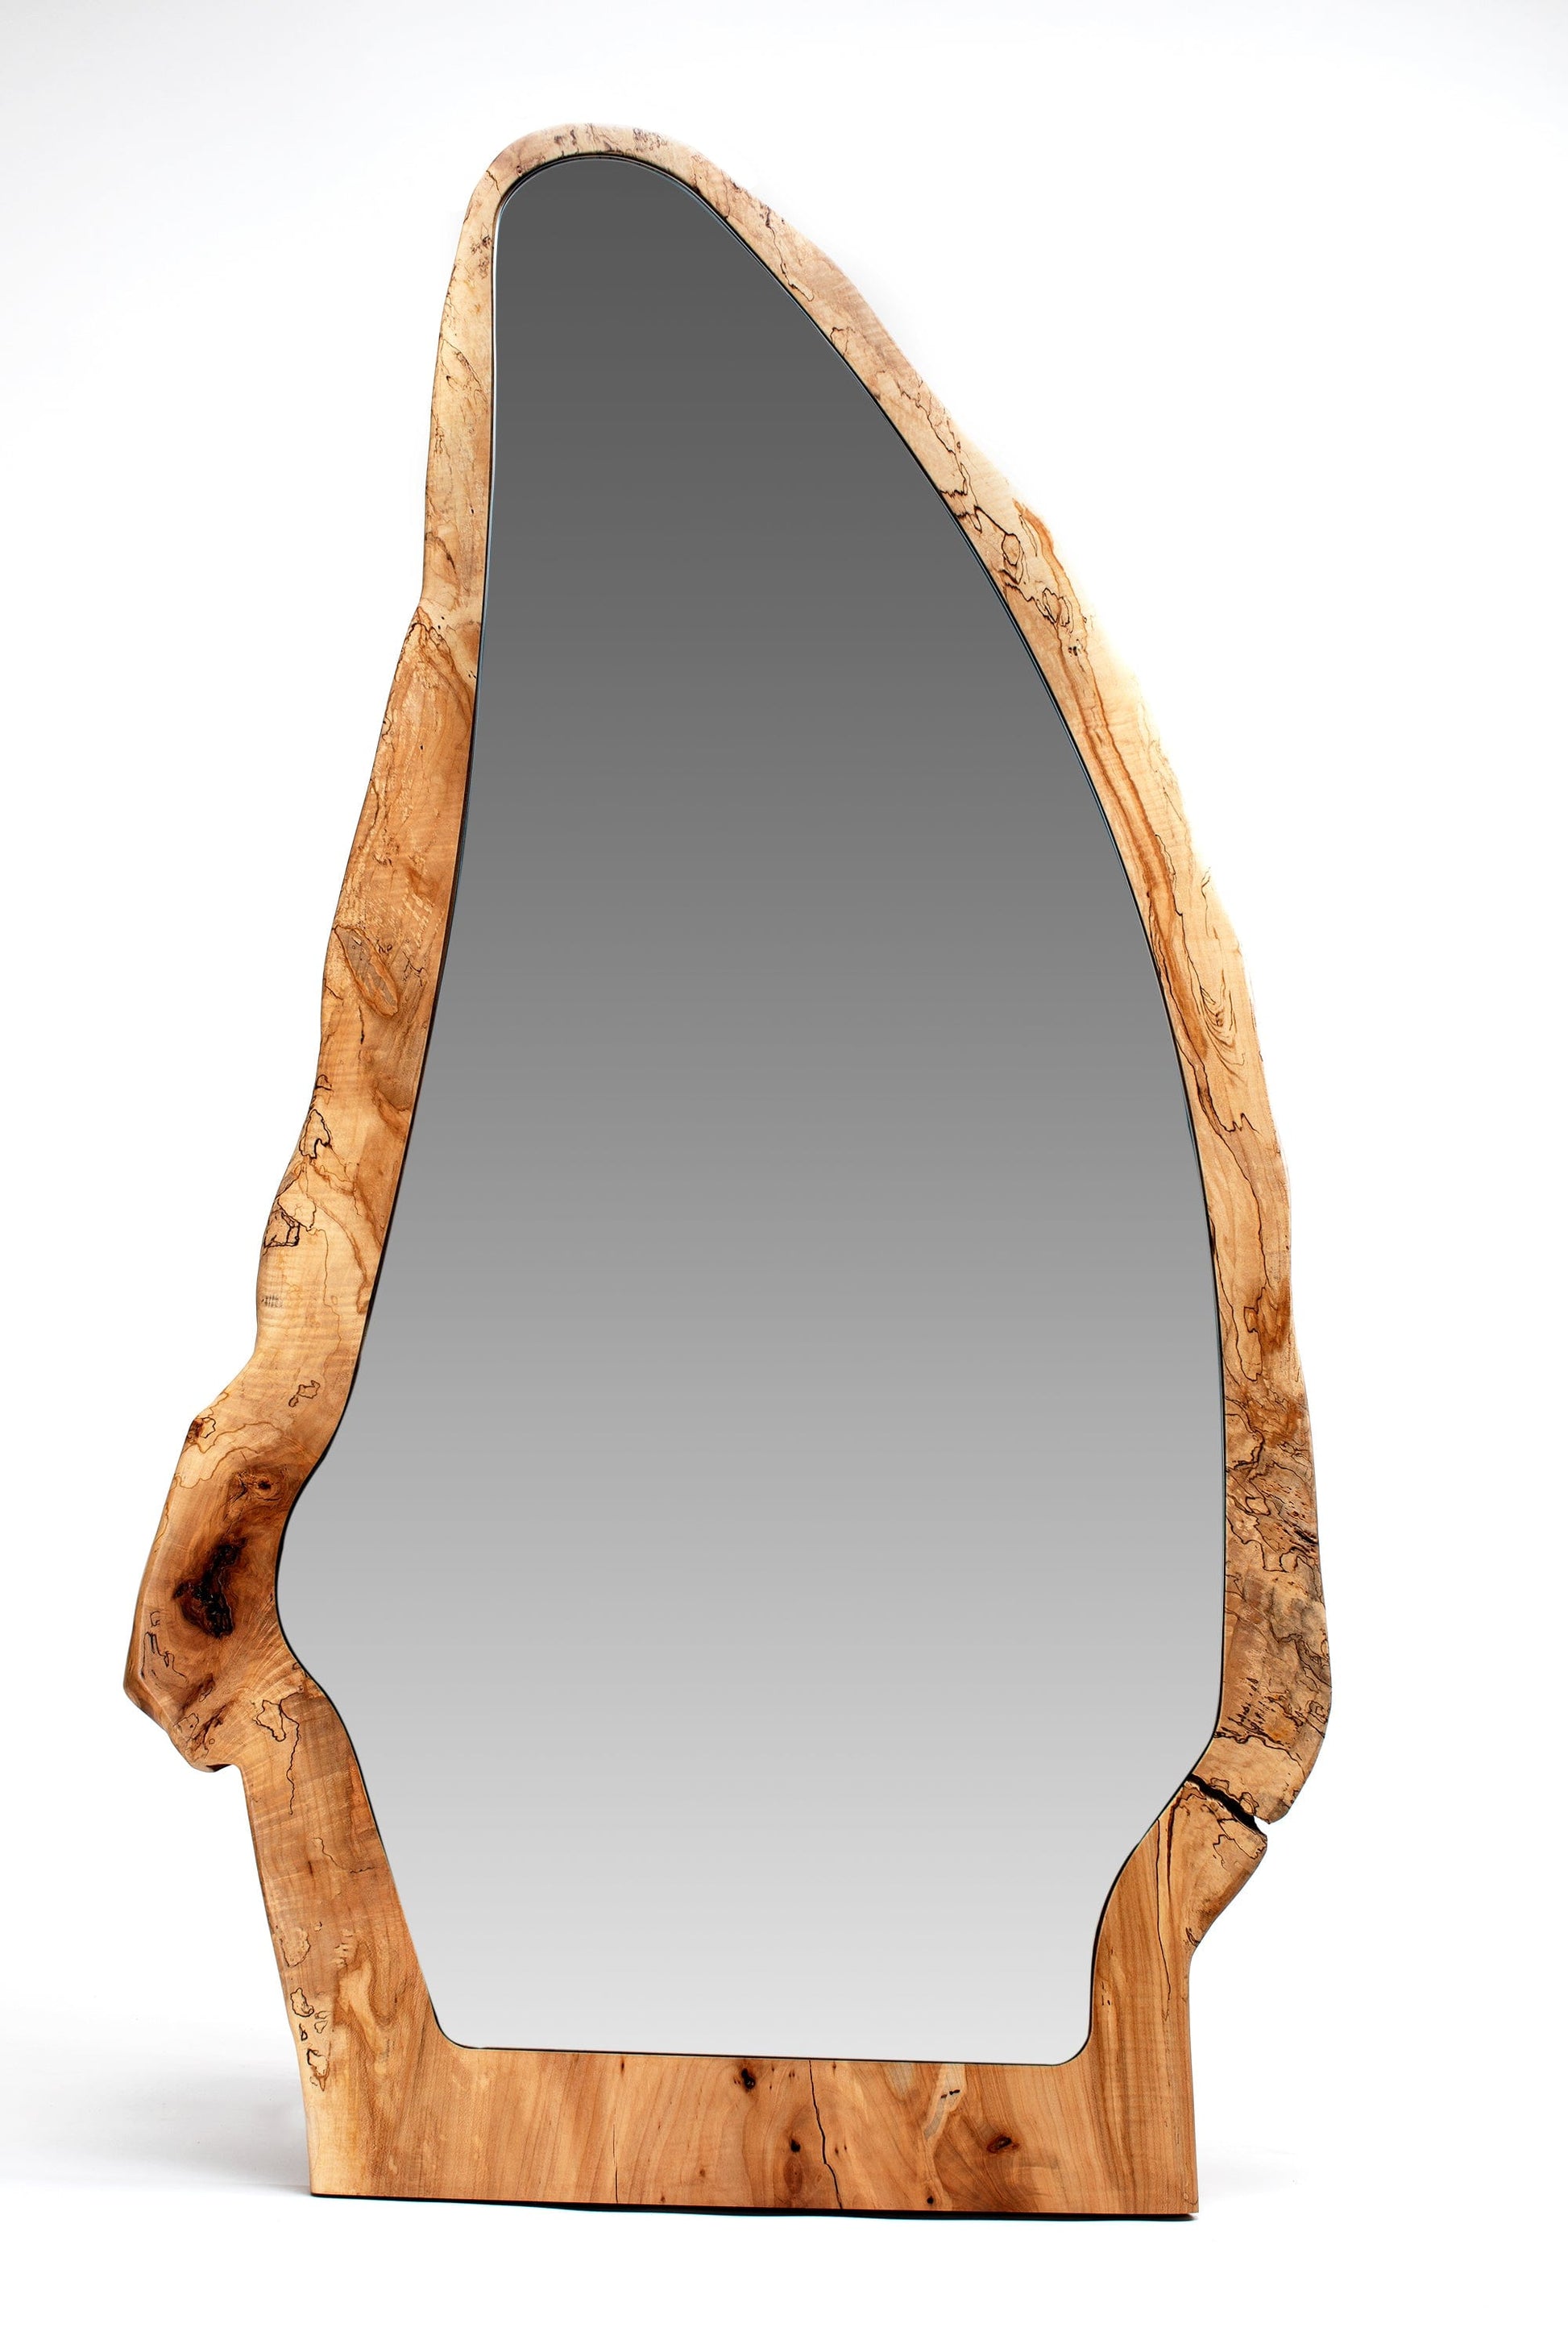 The Carpentry Shop Co. Nature Inspired Leaning Mirror